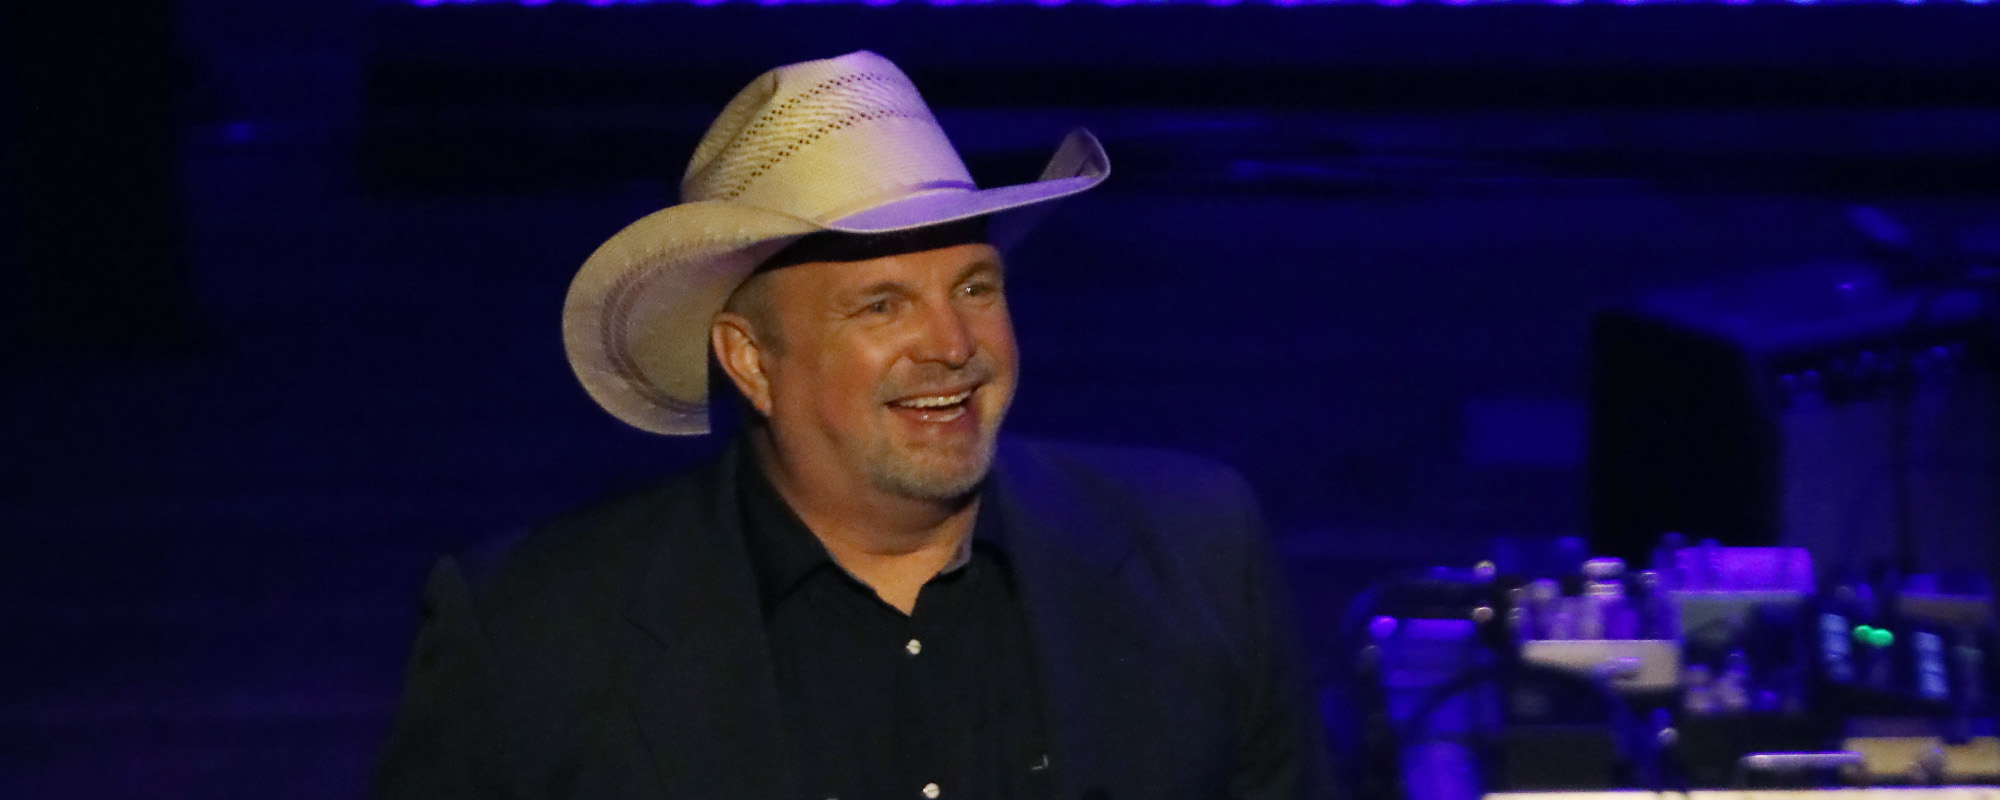 Garth Brooks Says His New Lower Broadway Honky Tonk, Friends in Low Places, is His Way of Repaying Nashville for His Success